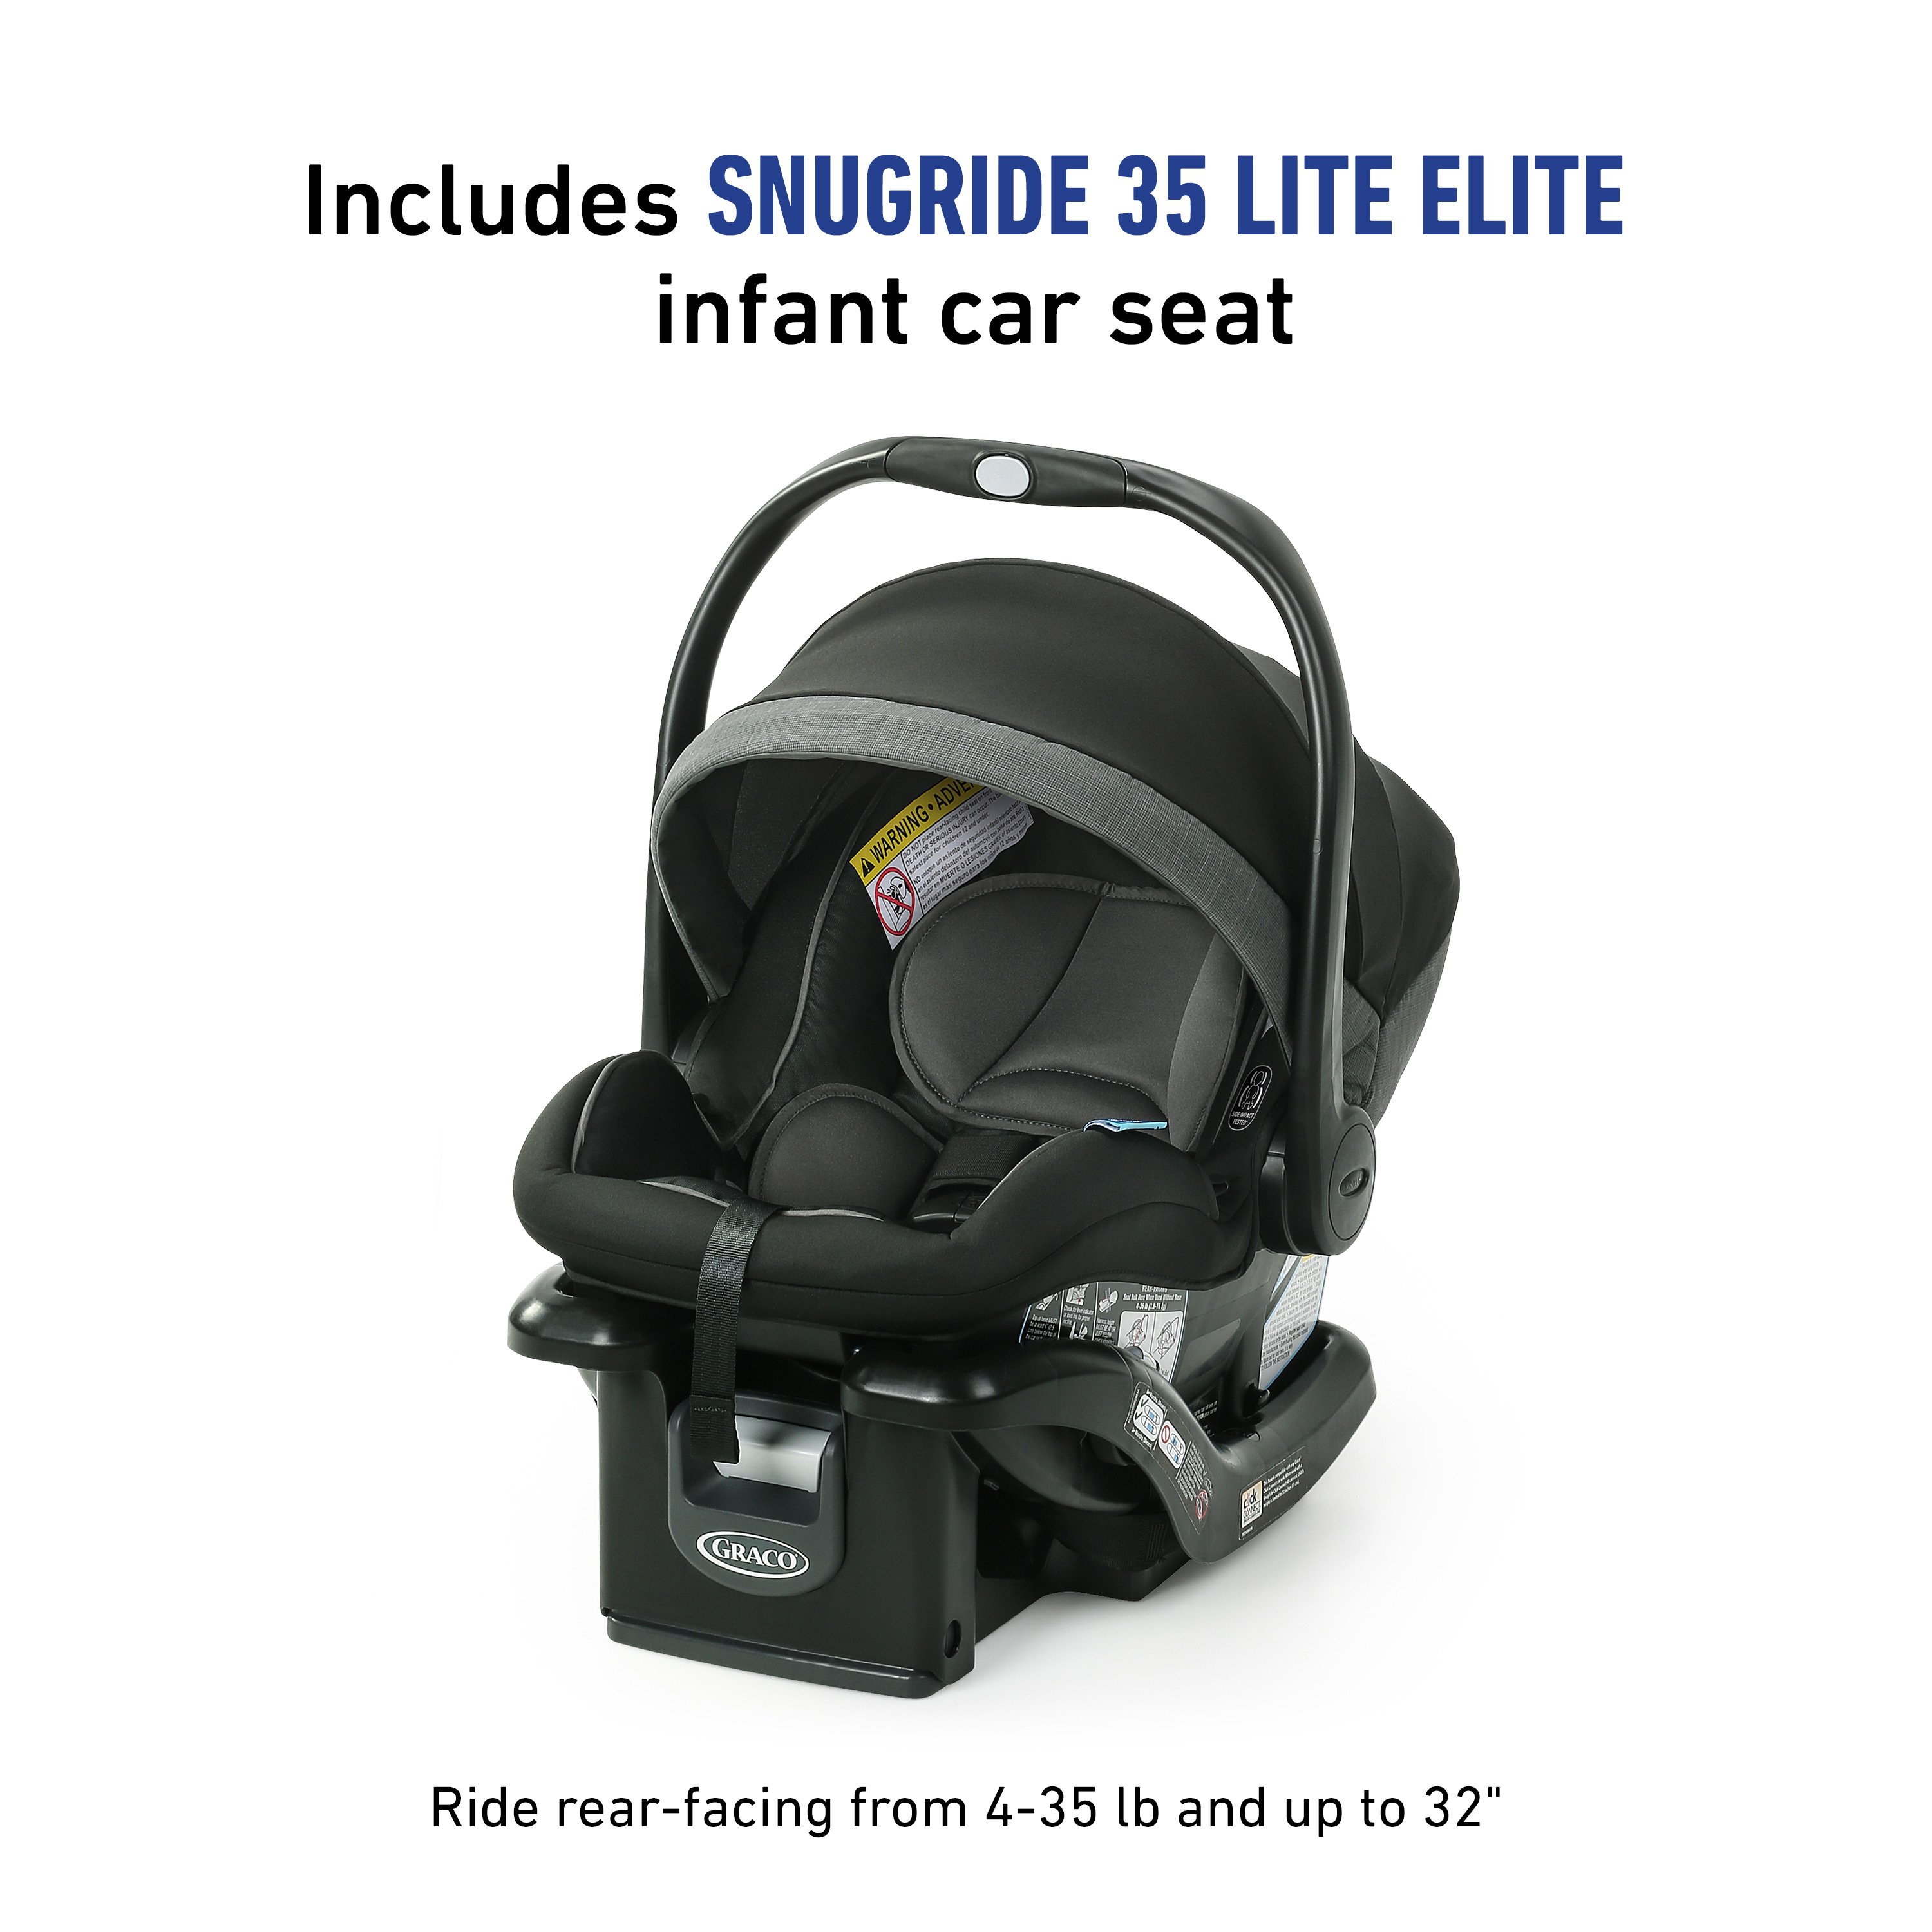 graco modes travel system car seat